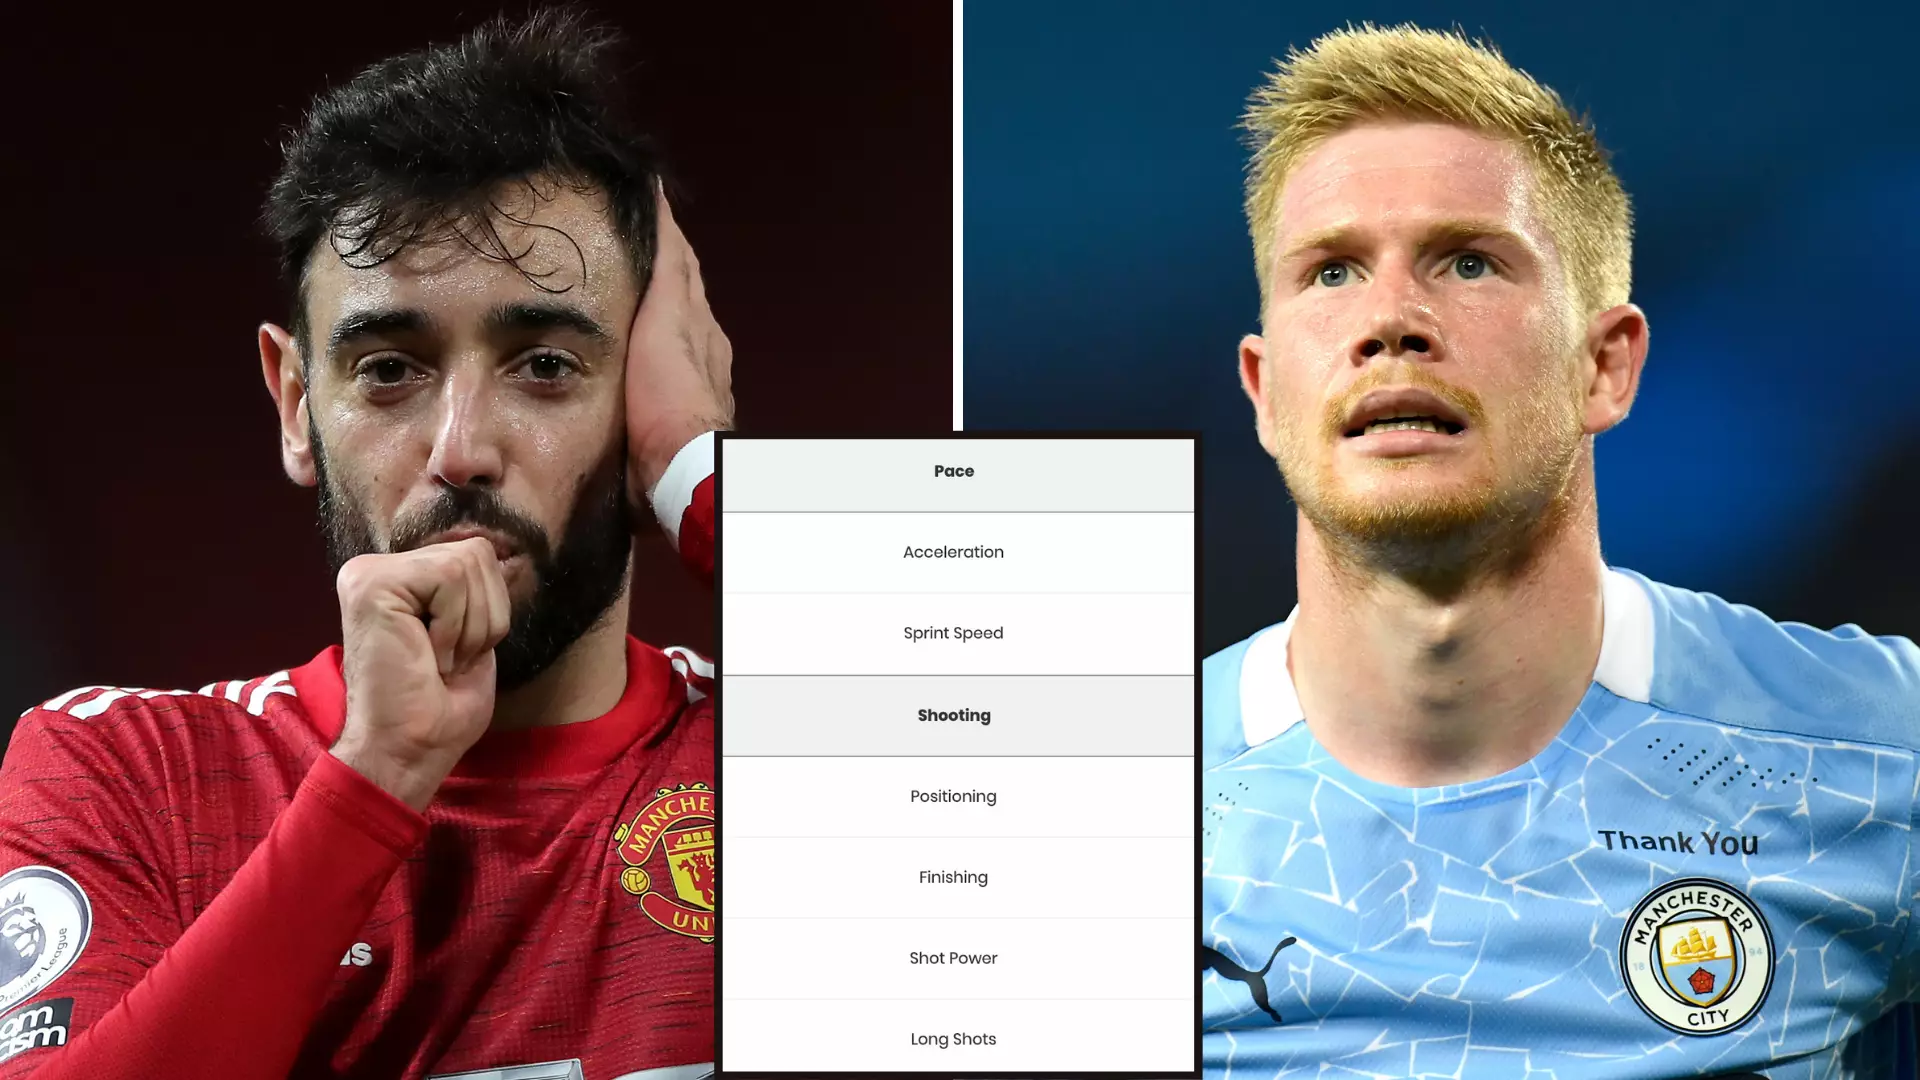 Bruno Fernandes Vs Kevin De Bruyne: The 29 FIFA 21 Stats That Decide Who Is The Better Player